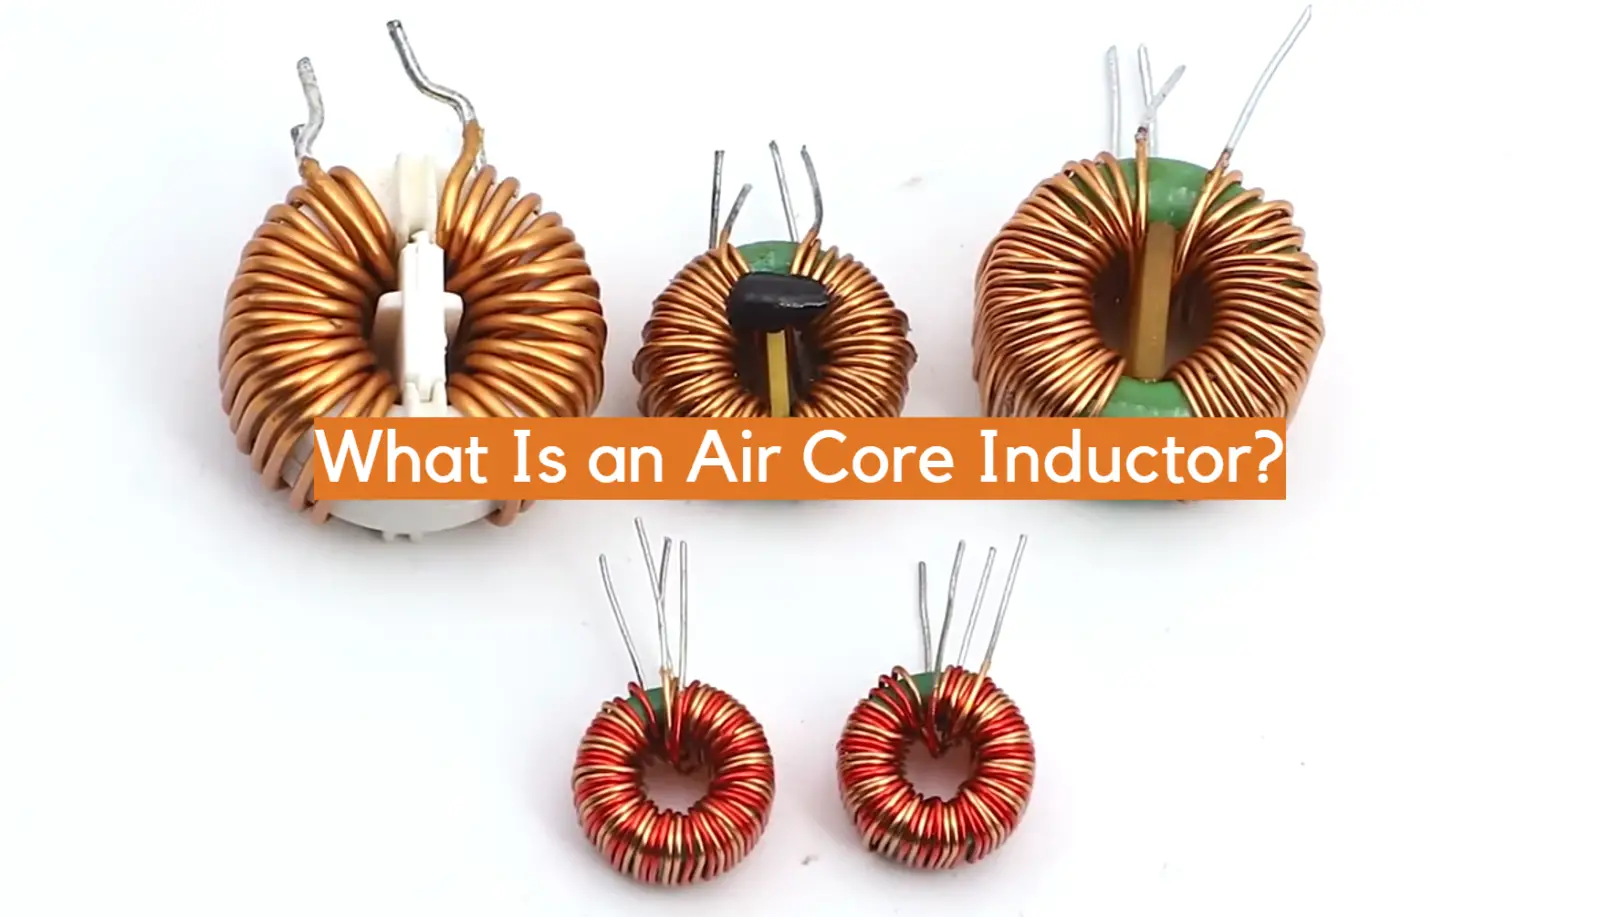 What Is an Air Core Inductor?